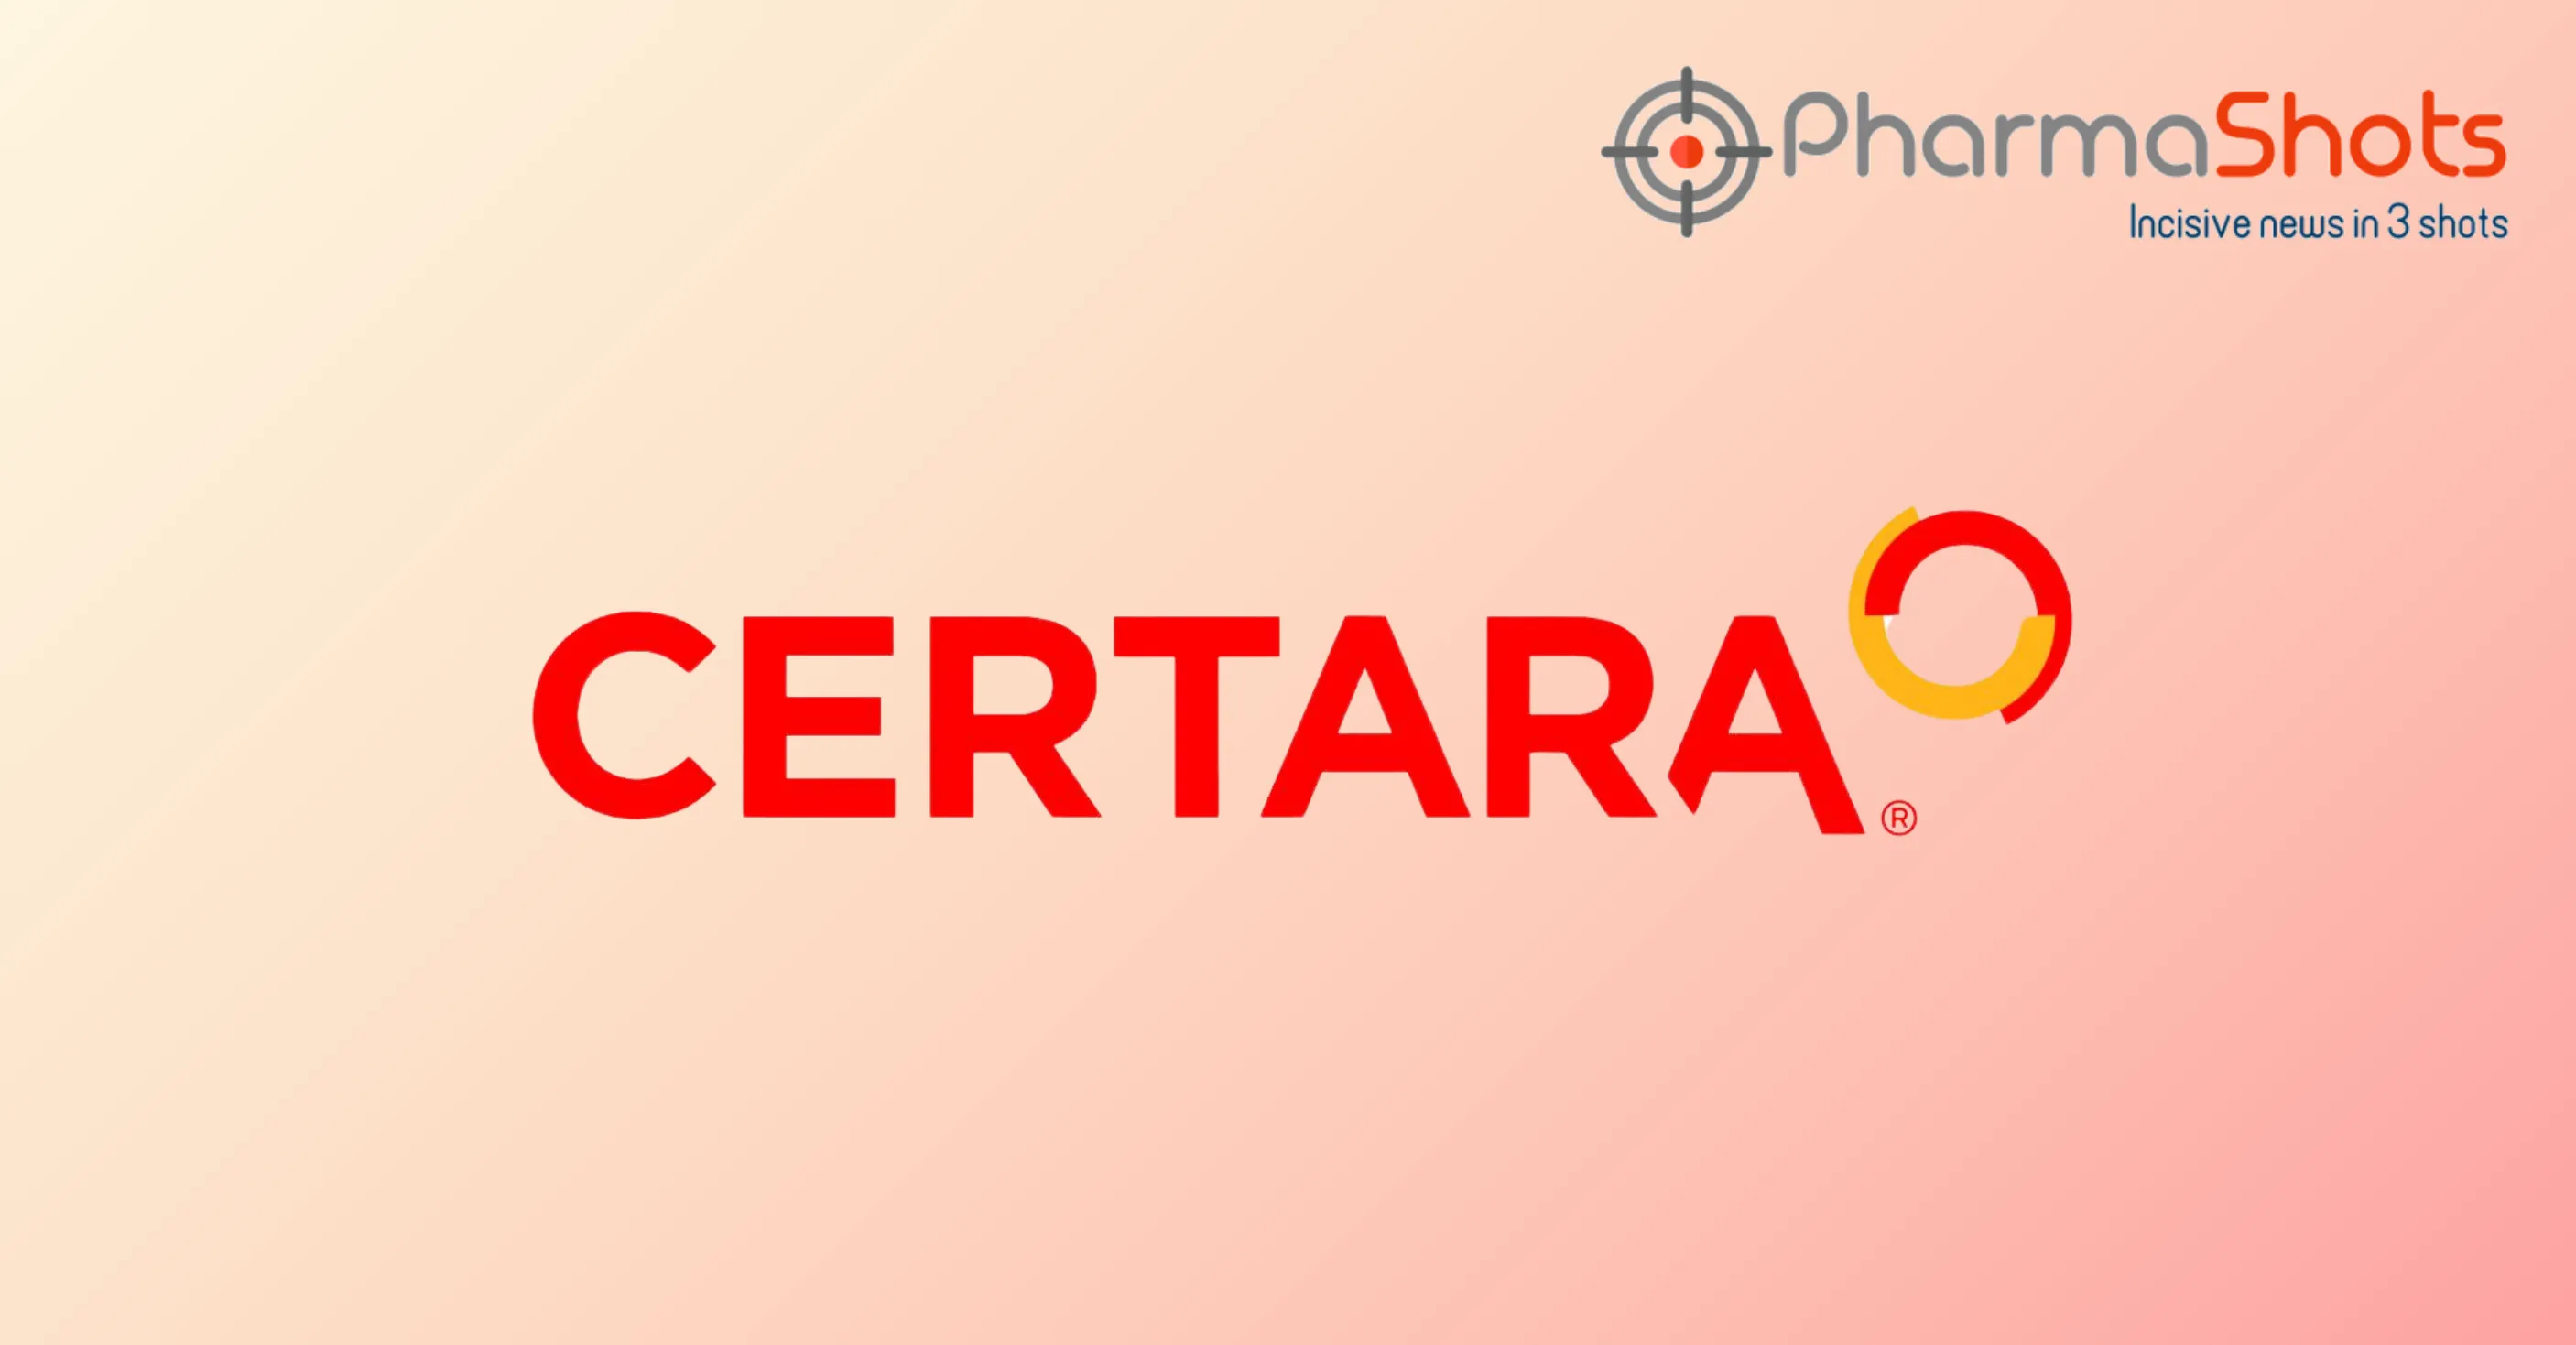 Certara to Expand its Drug Discovery Software Capabilities Through the Acquisition of Chemaxon